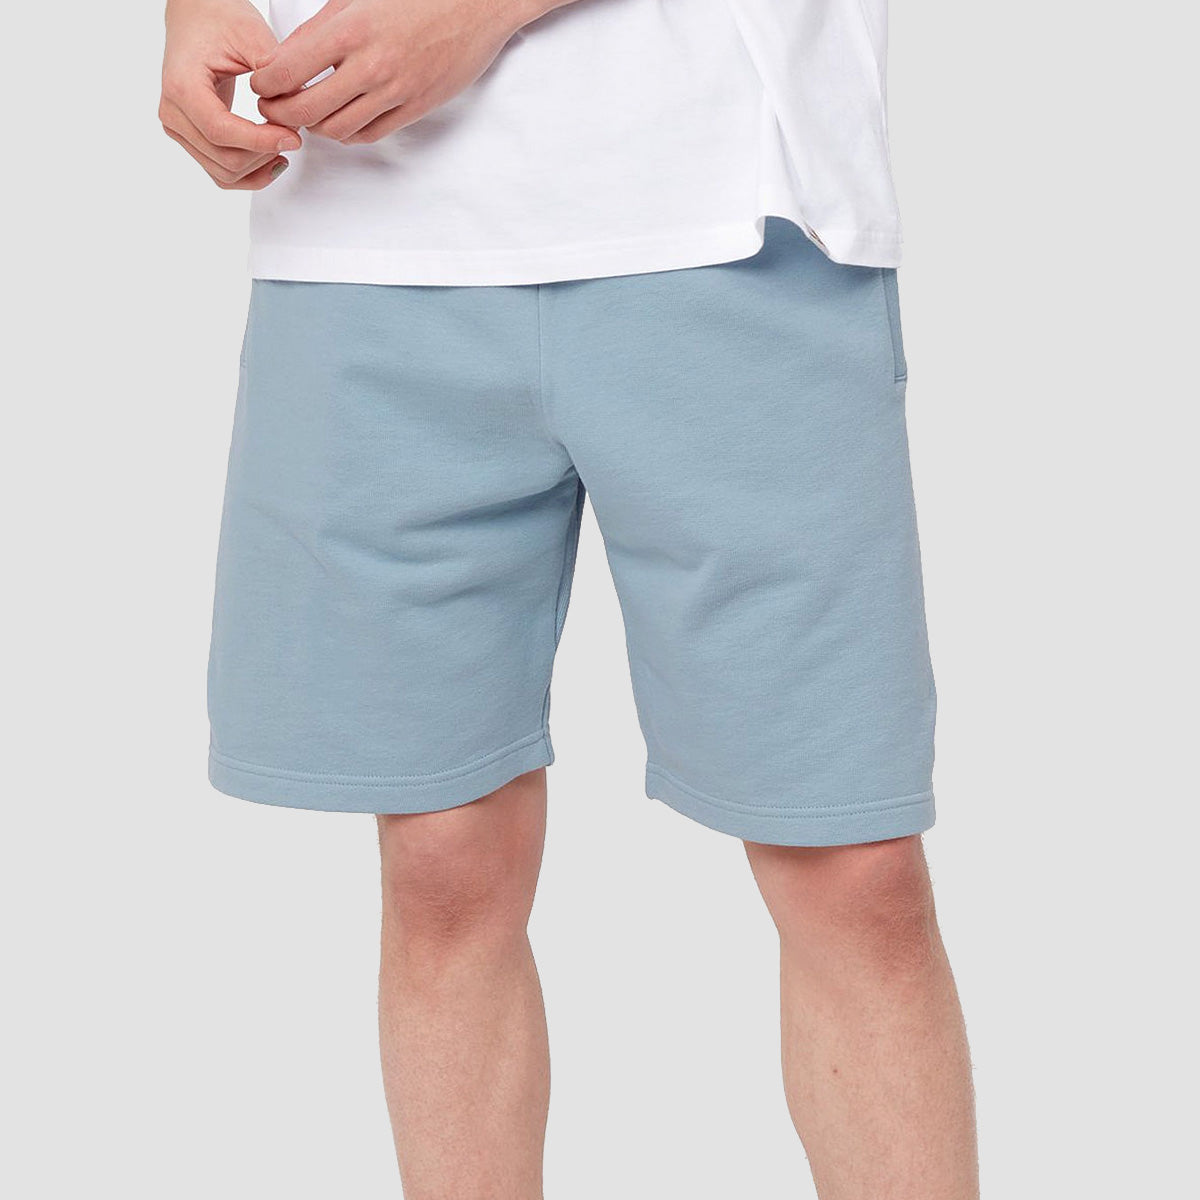 Carhartt WIP Pocket Sweat Shorts Frosted Blue